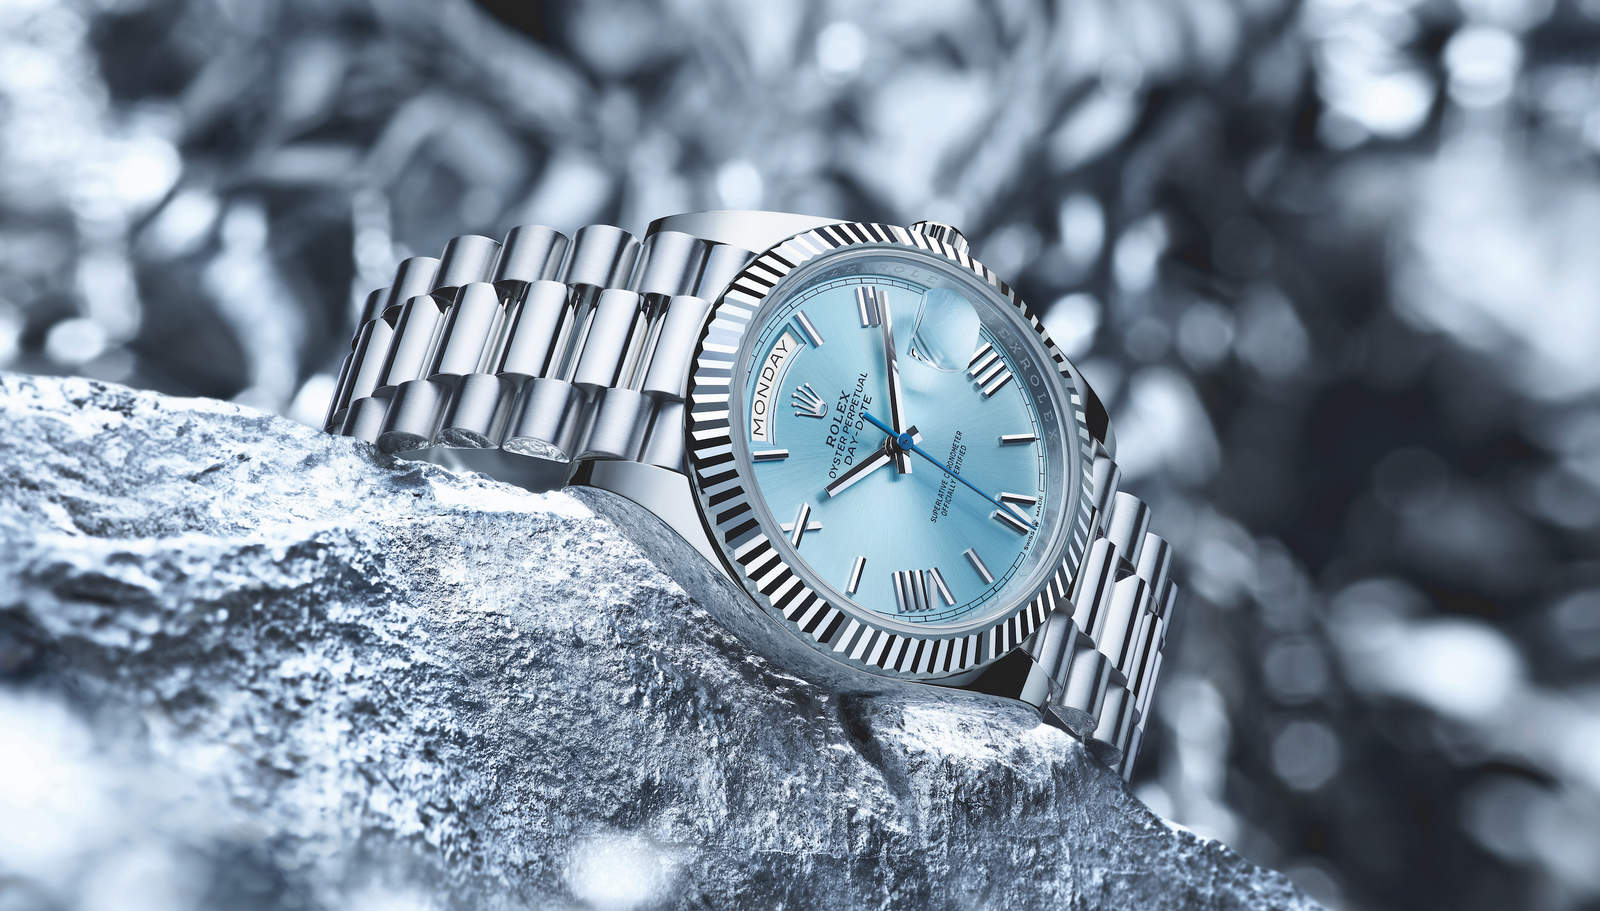 The flagship platinum Rolex Oyster Perpetual Day-Date 36 and 40 models have been updated with a fluted bezel